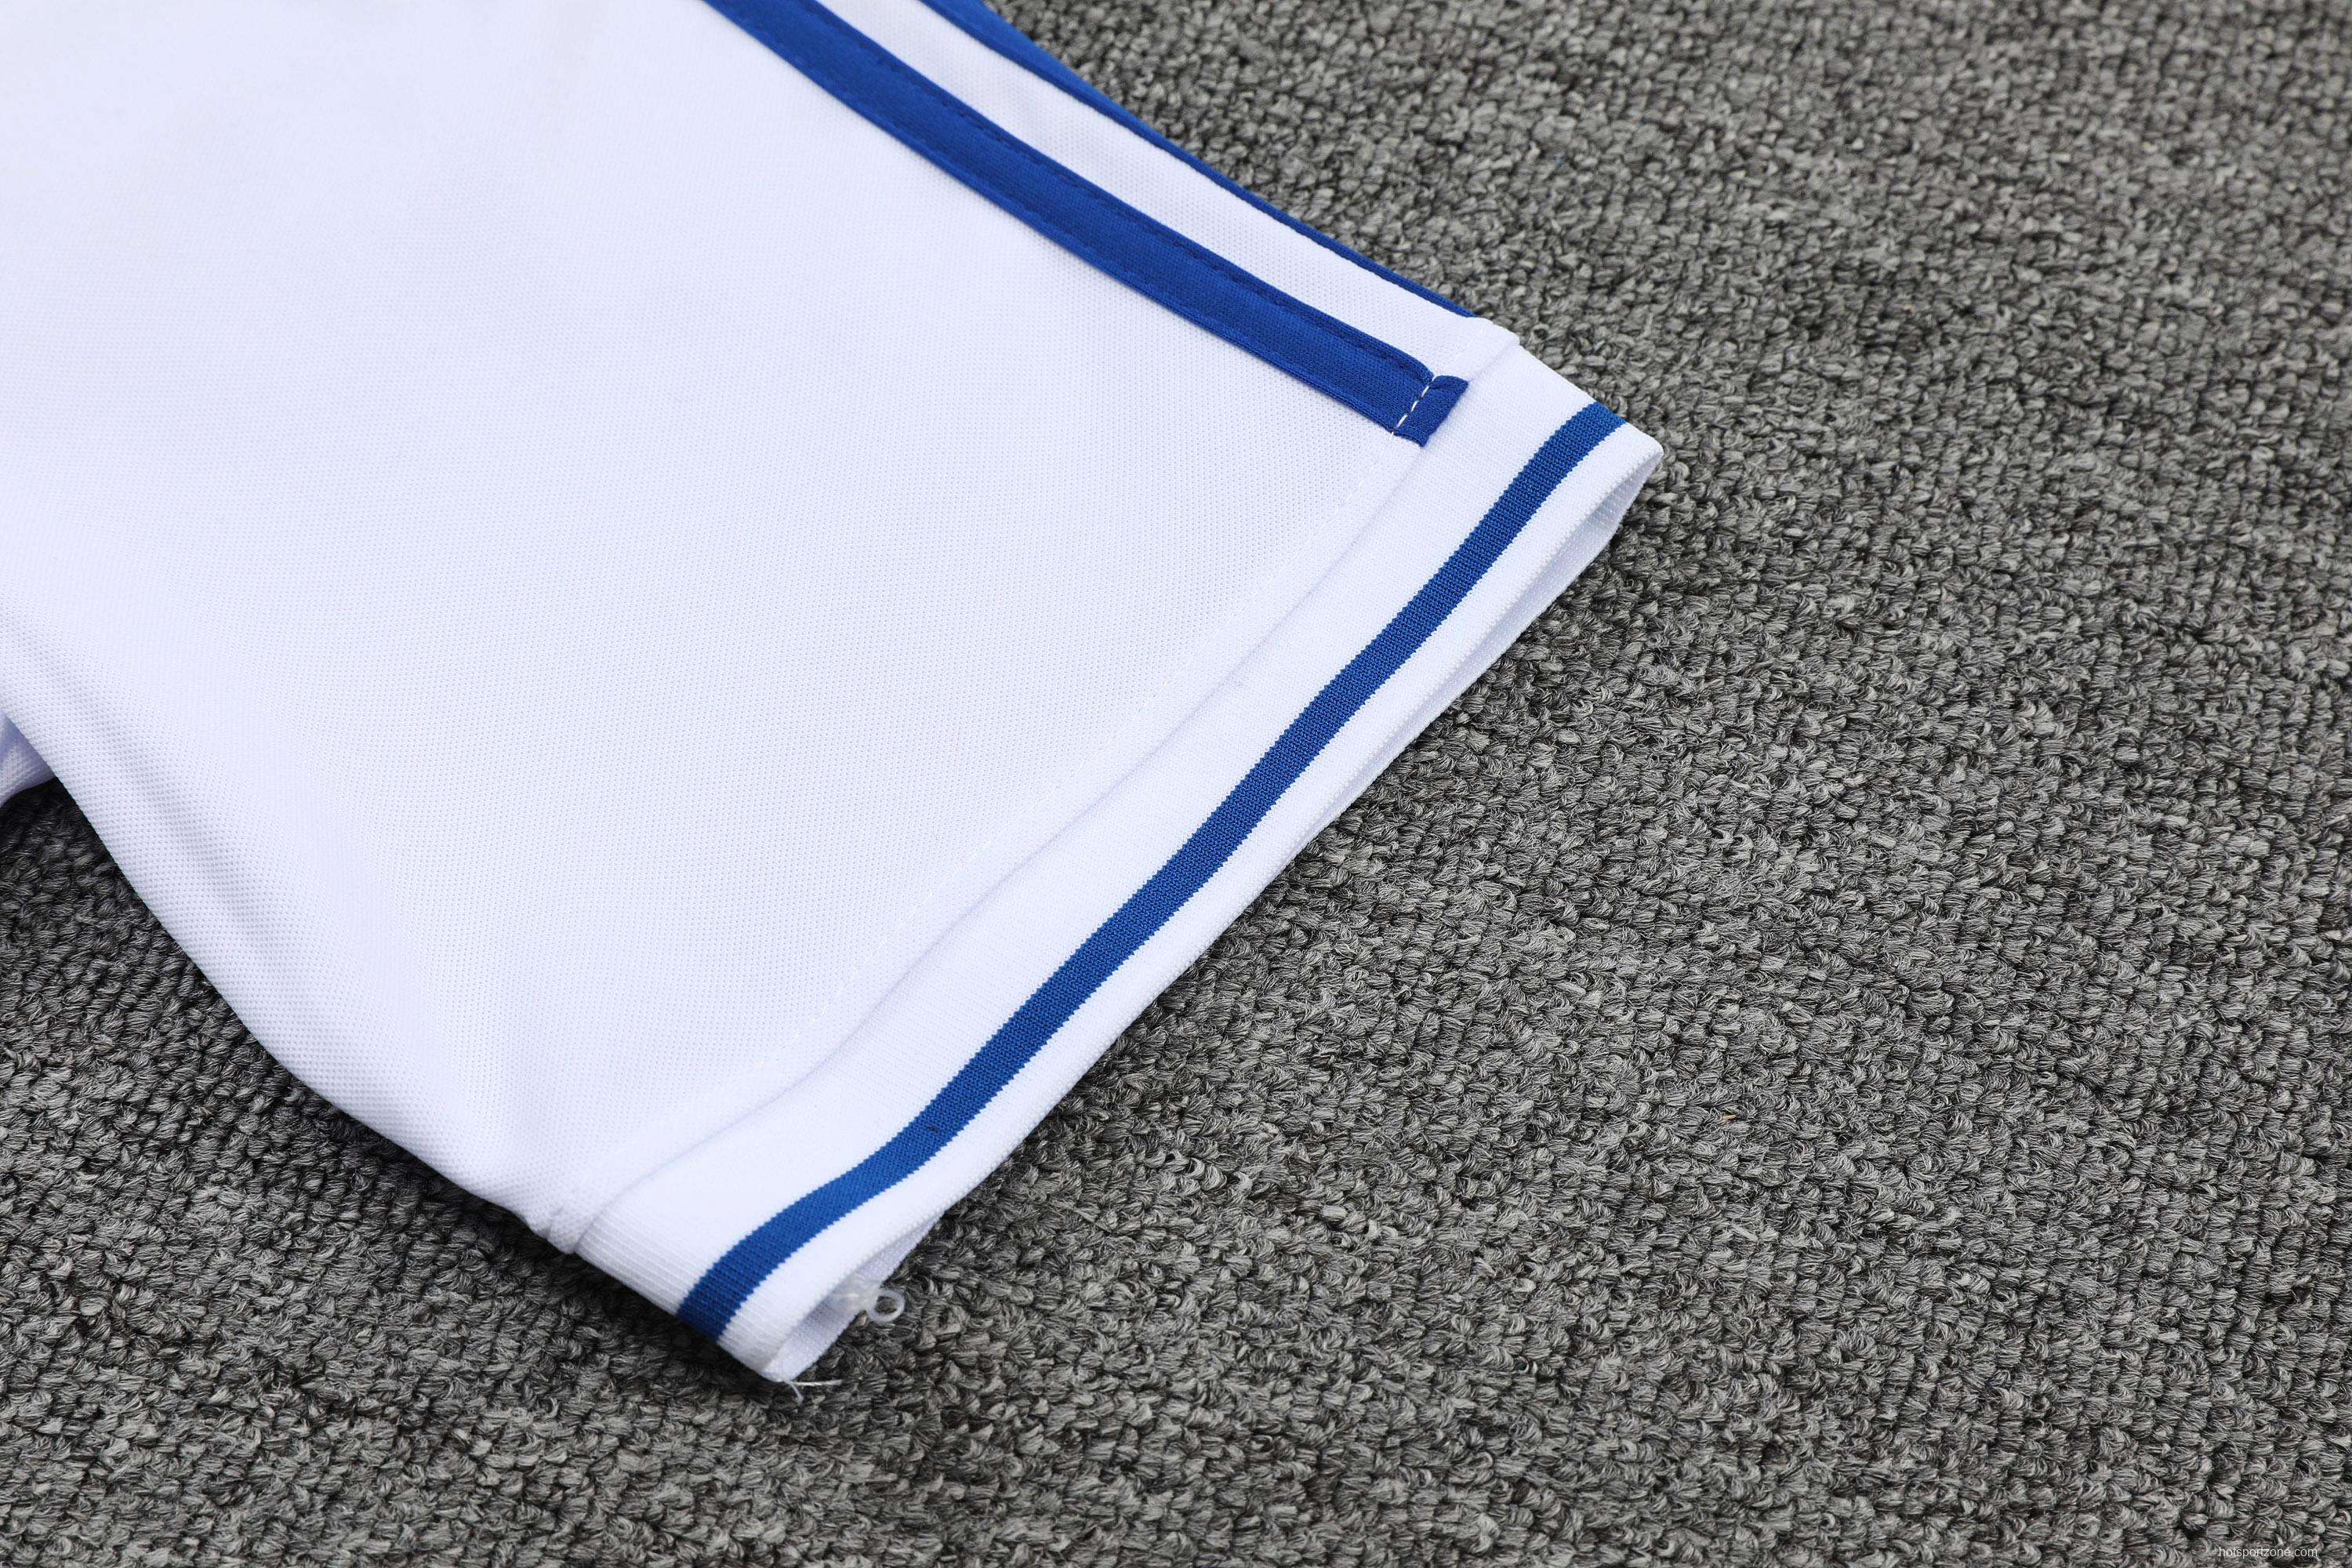 Juventus POLO kit blue and white (not sold separately)